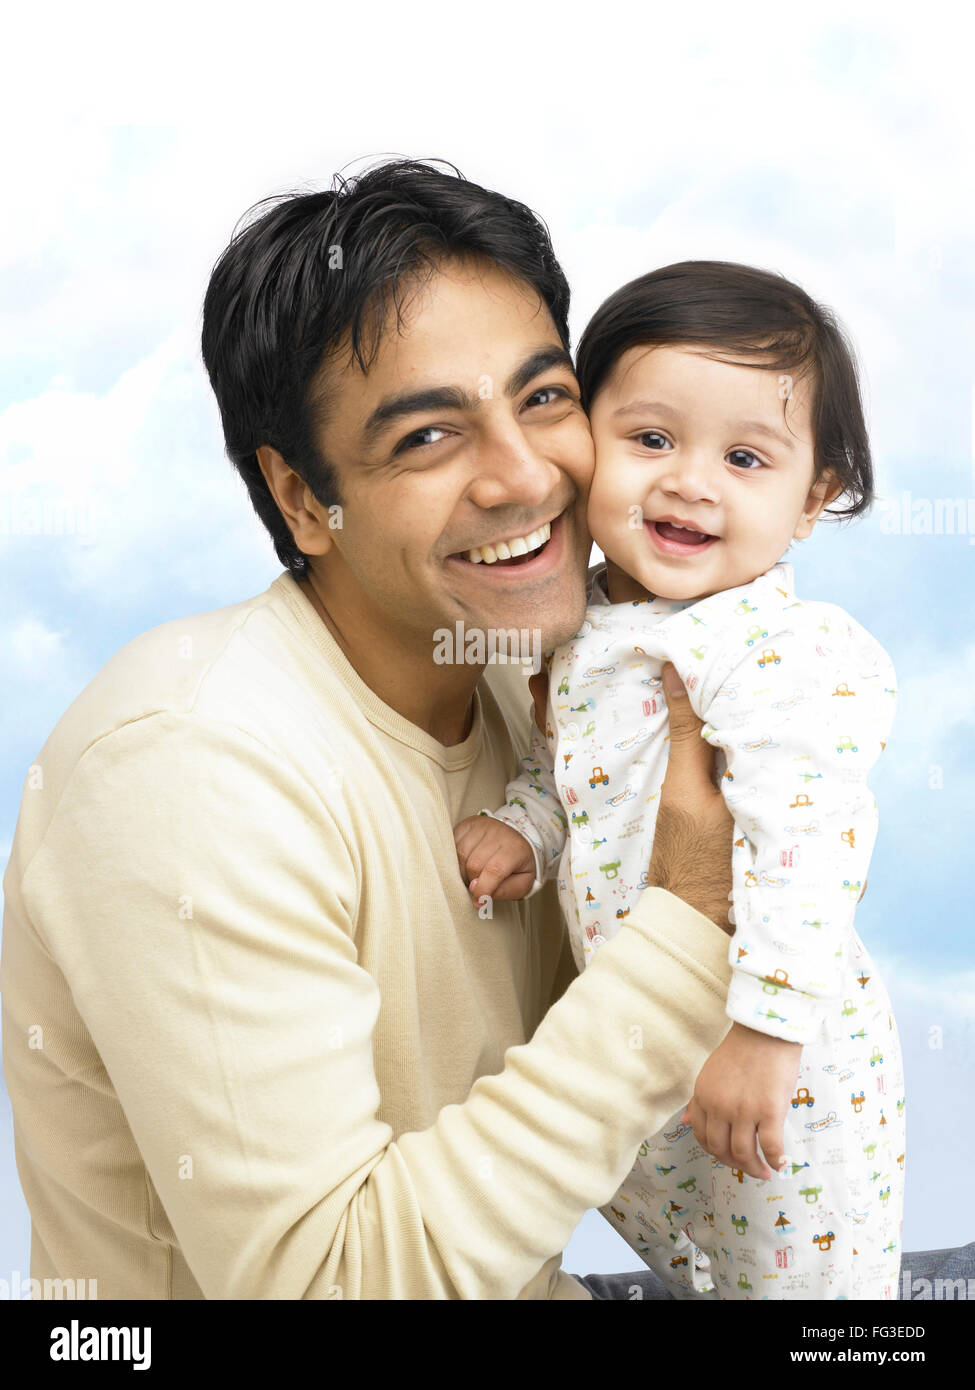 Father baby, man child, father daughter, MR#702O;702A Stock Photo